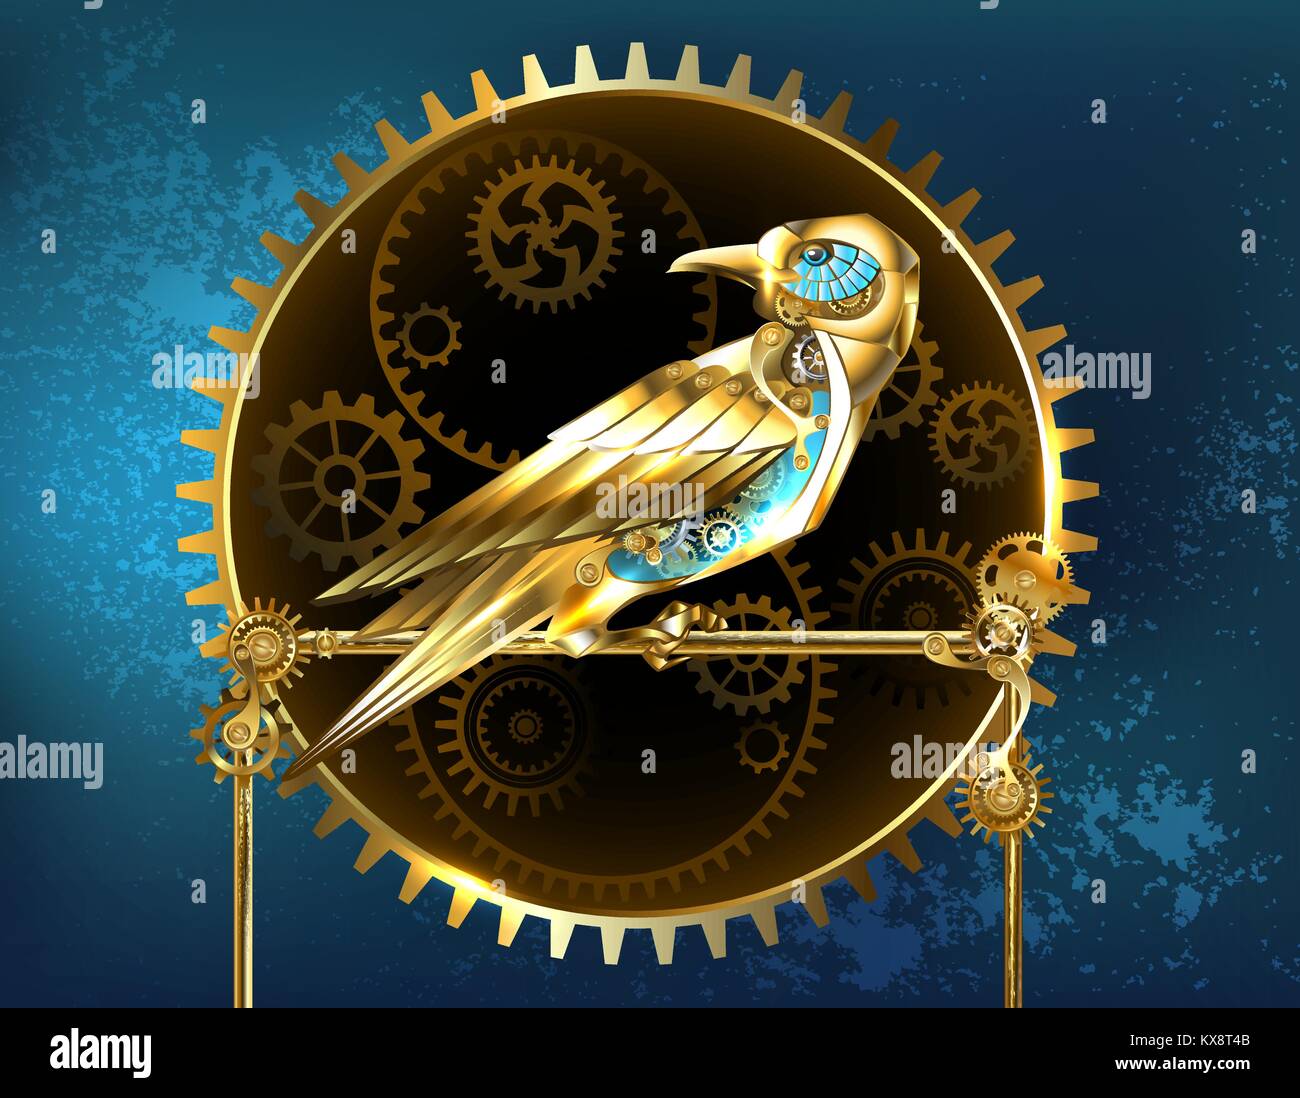 Mechanical, golden bird with brass gears on a turquoise background. Steampunk style. Stock Vector